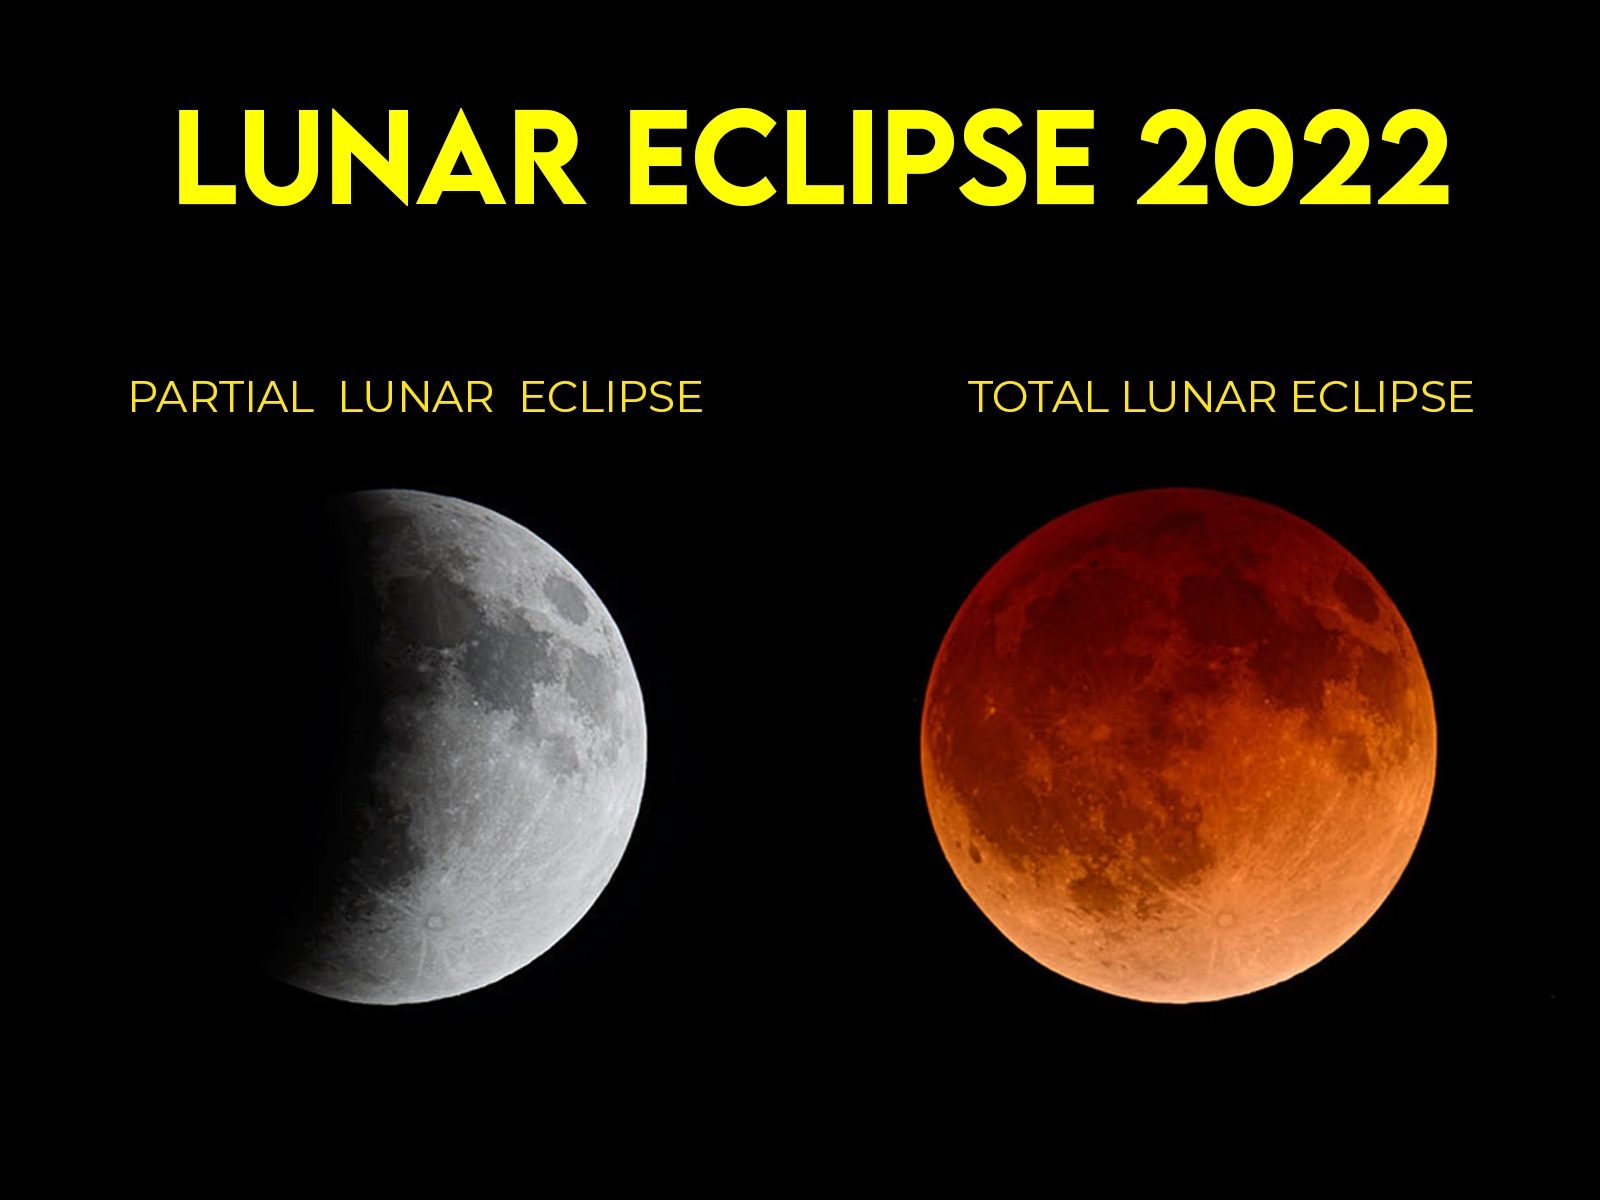 Lunar Eclipse 2022: Check Dos and Don'ts, timings, and other details here